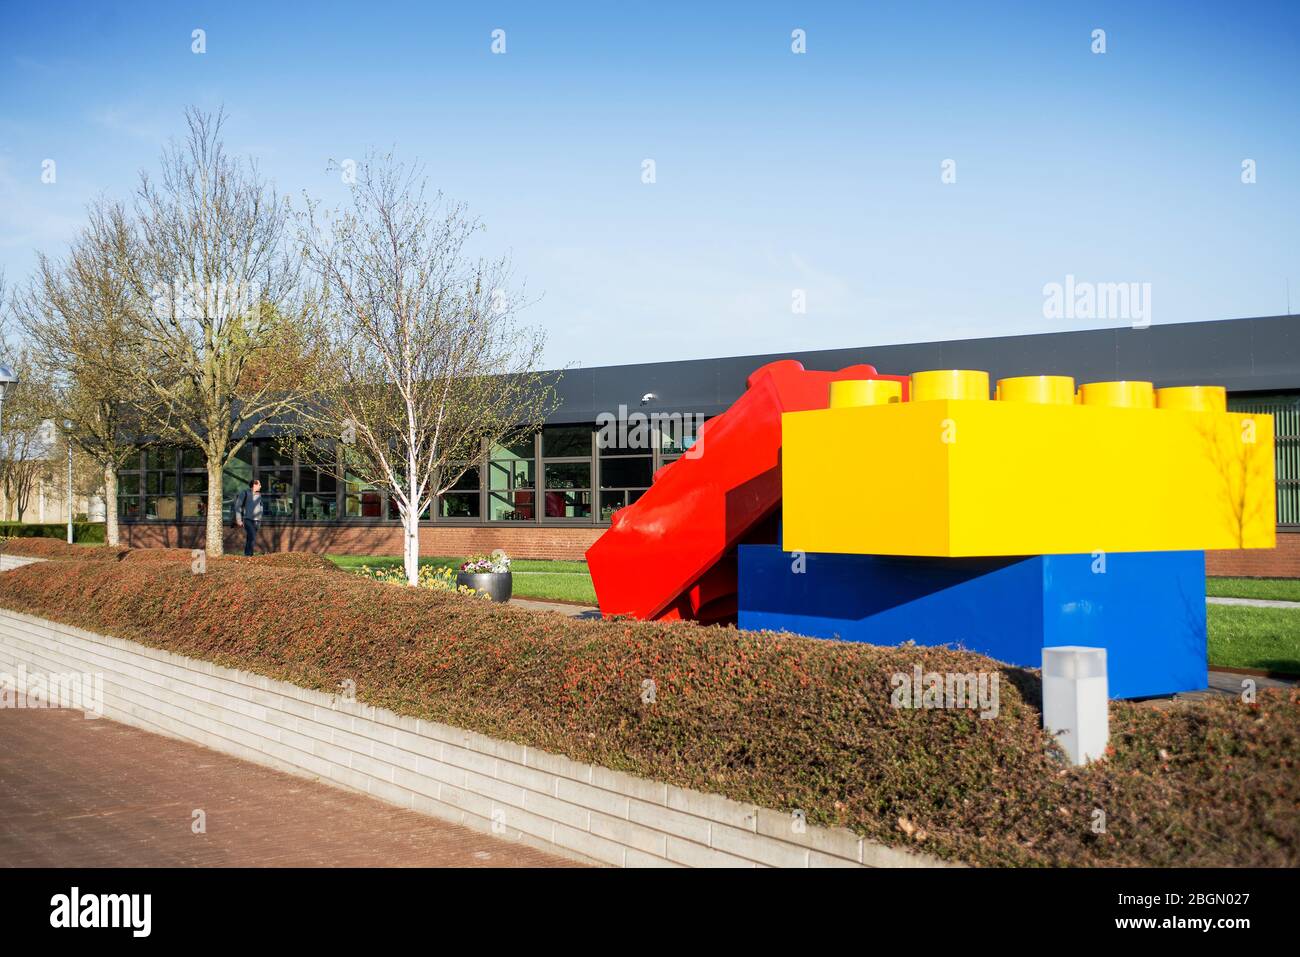 Lego Billund Factory High Resolution Stock Photography and Images - Alamy